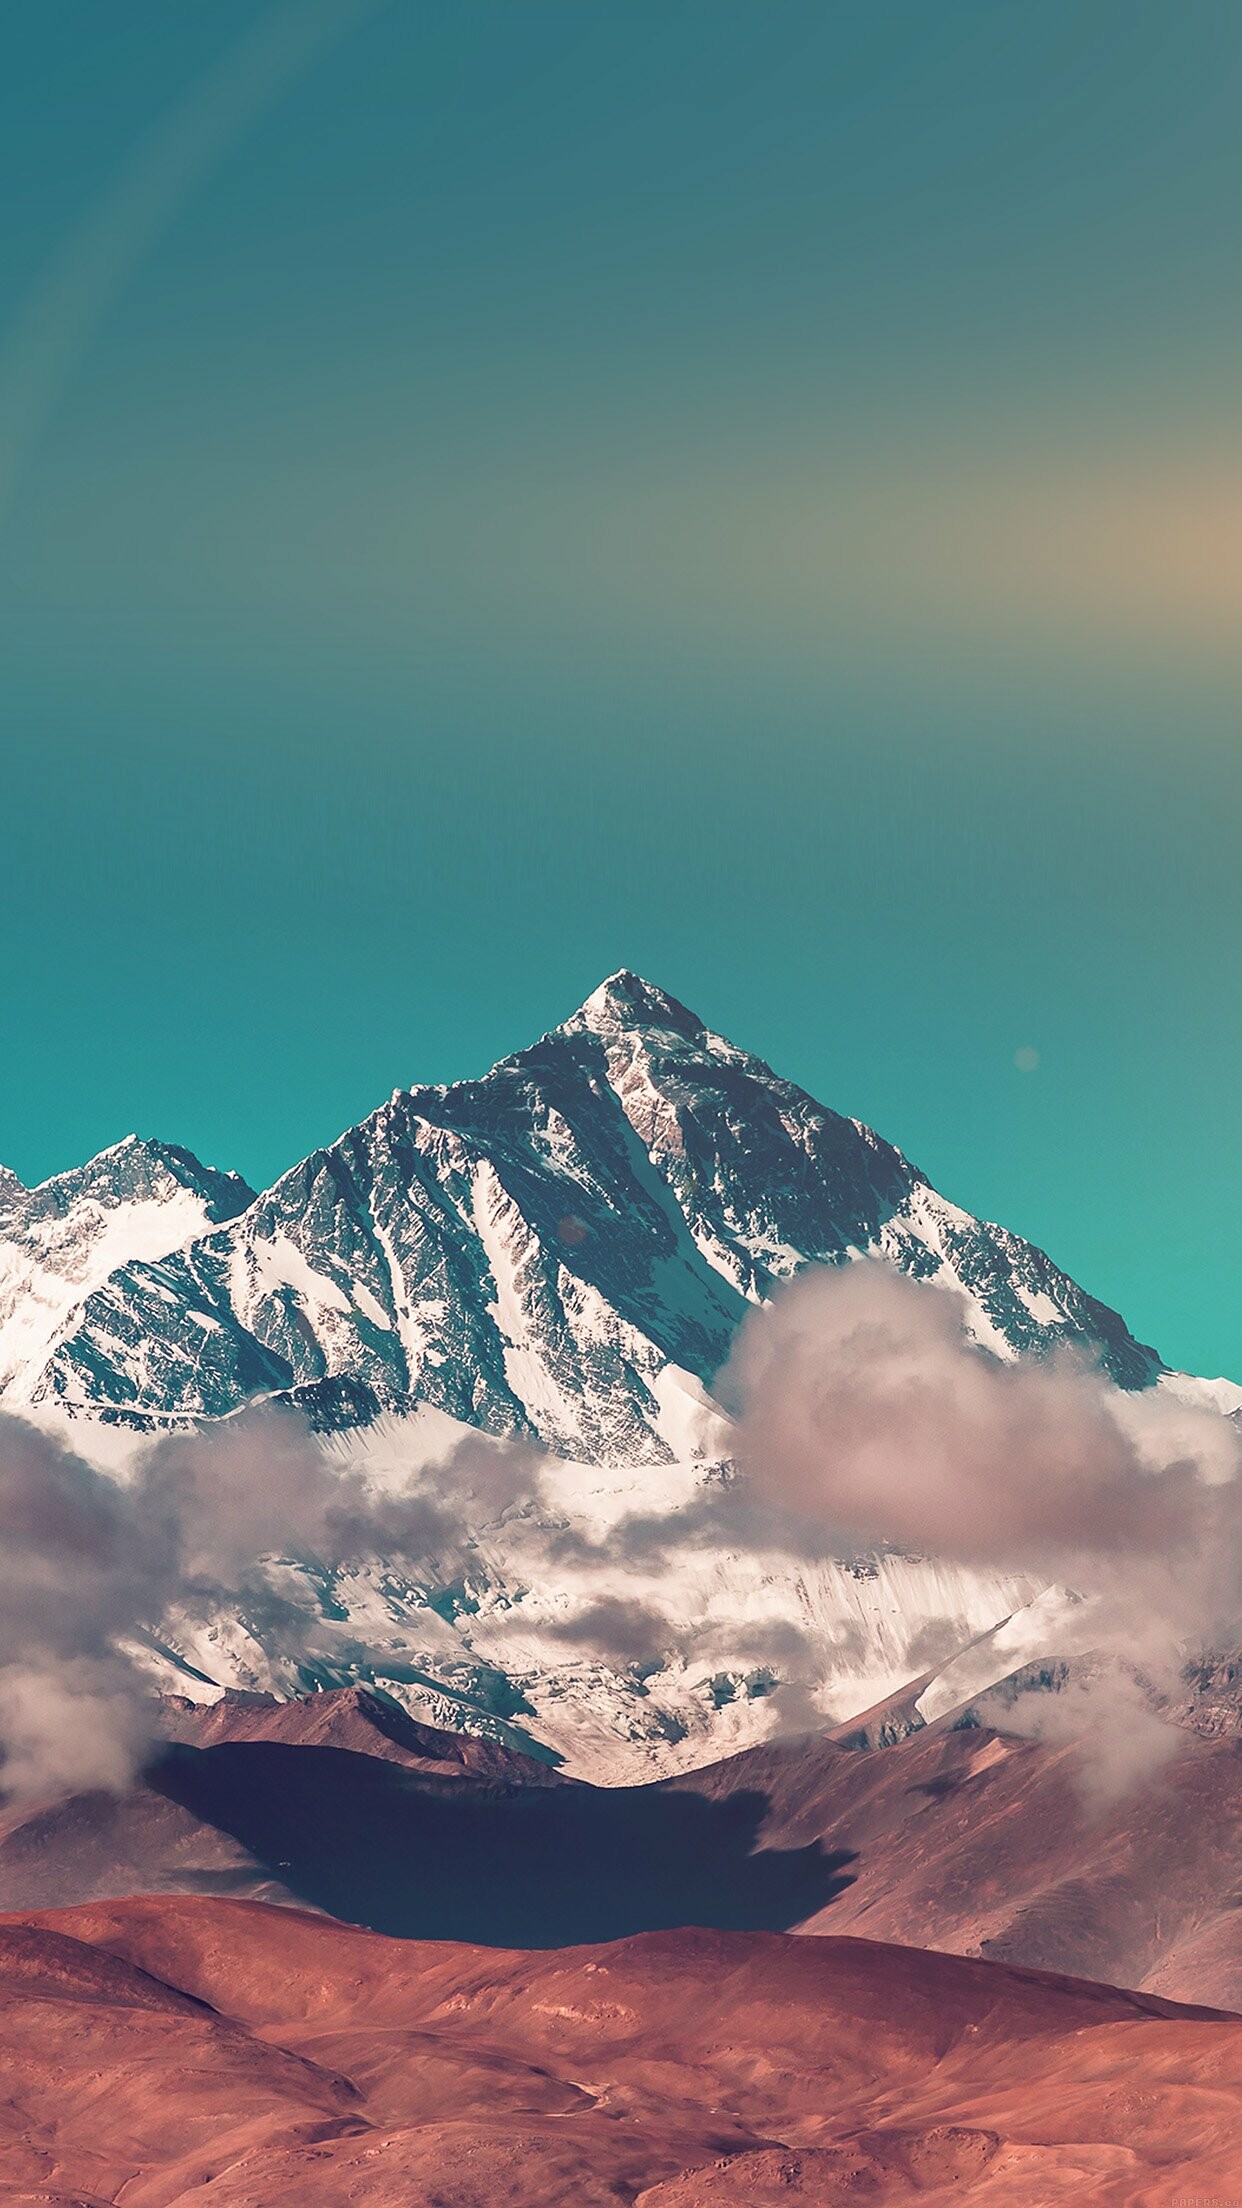 Mount Everest: Highest peak, sits on the crest of the Great Himalayas in Asia. 1250x2210 HD Background.